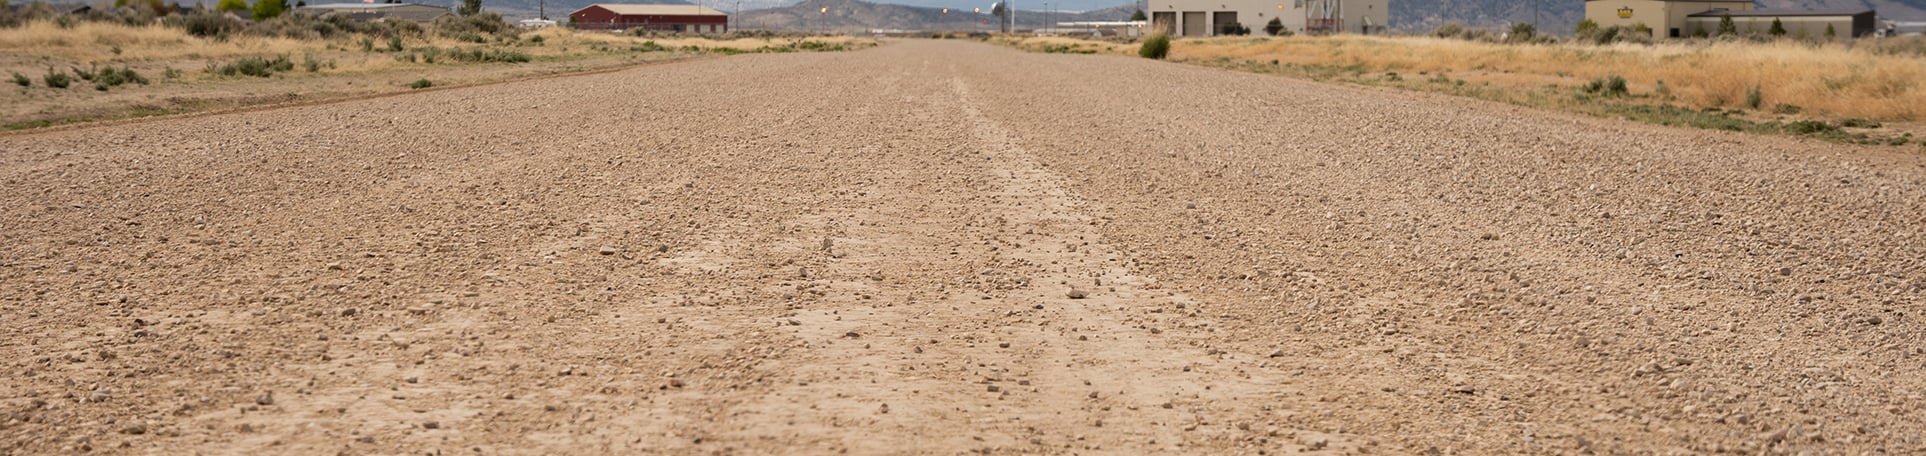 Unpaved Road Use Background